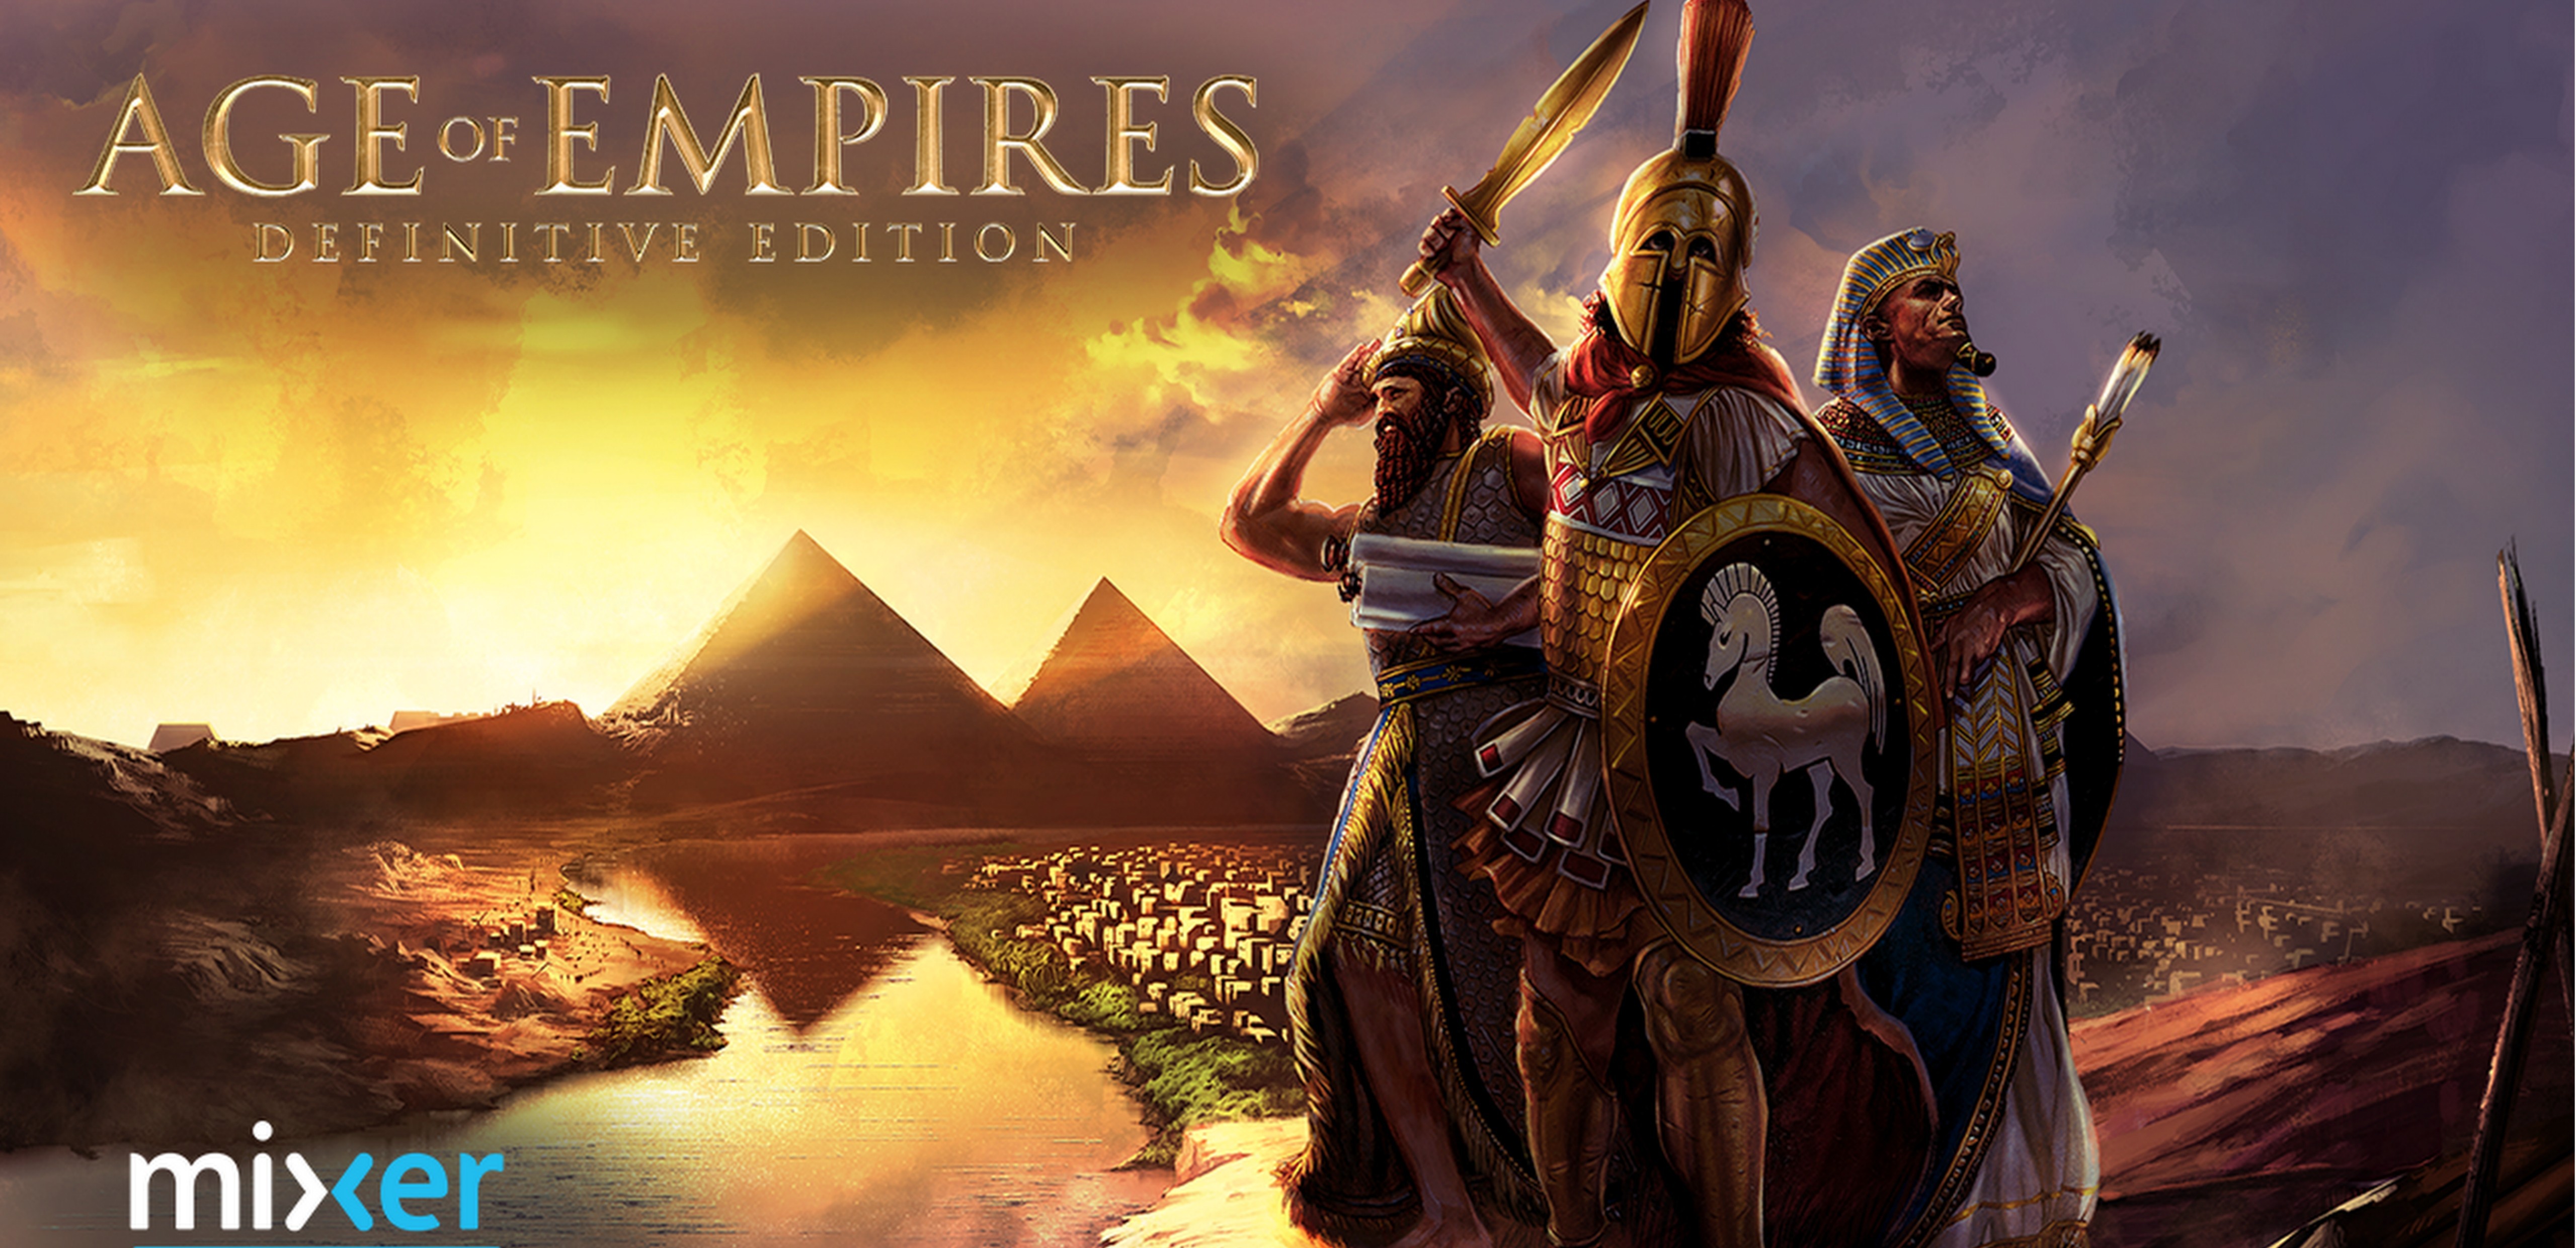 age of empires hd edition wiki